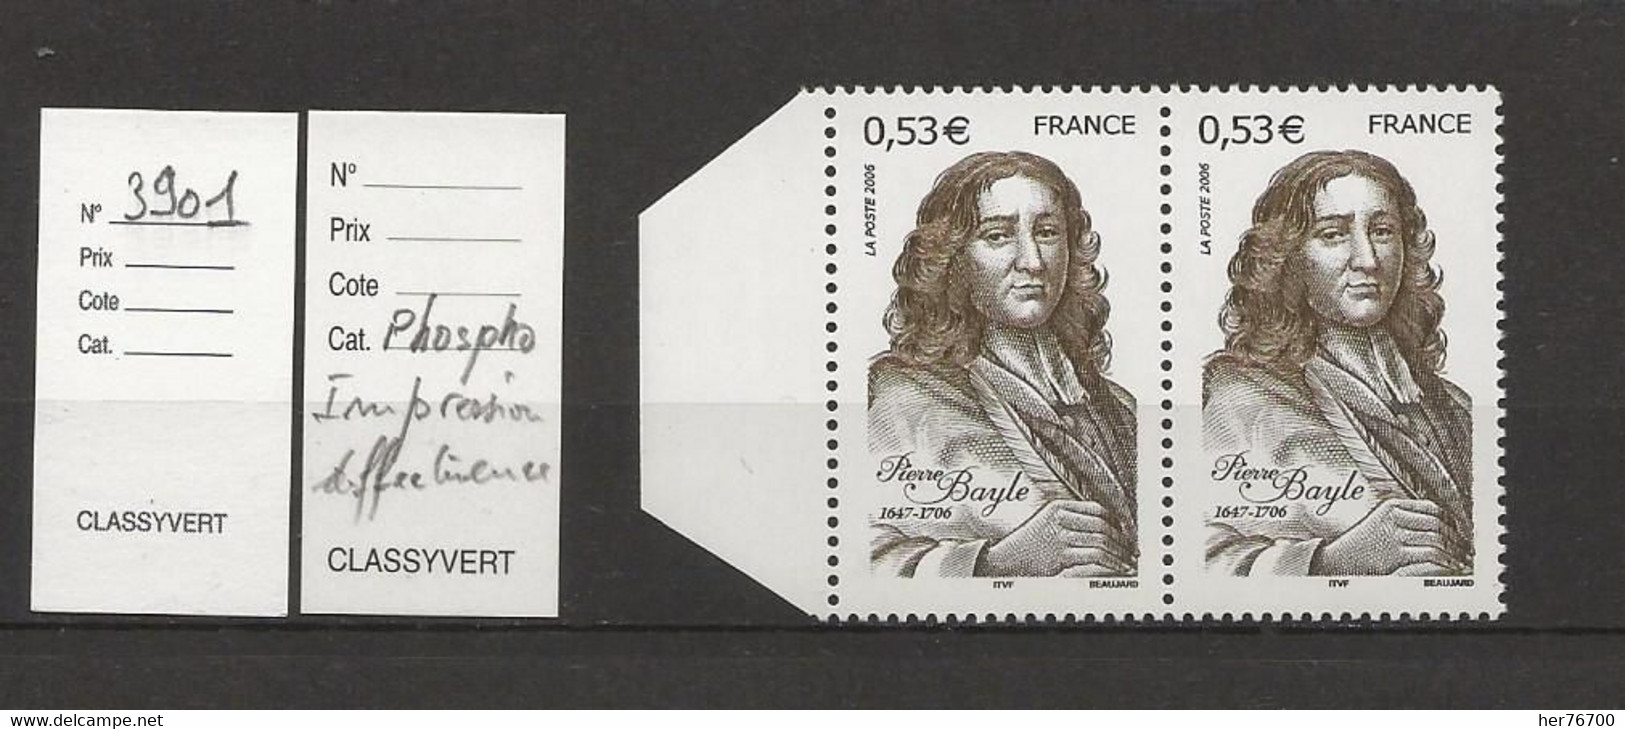 TIMBRE GOMME  YVERT N° 3901 - Unused Stamps